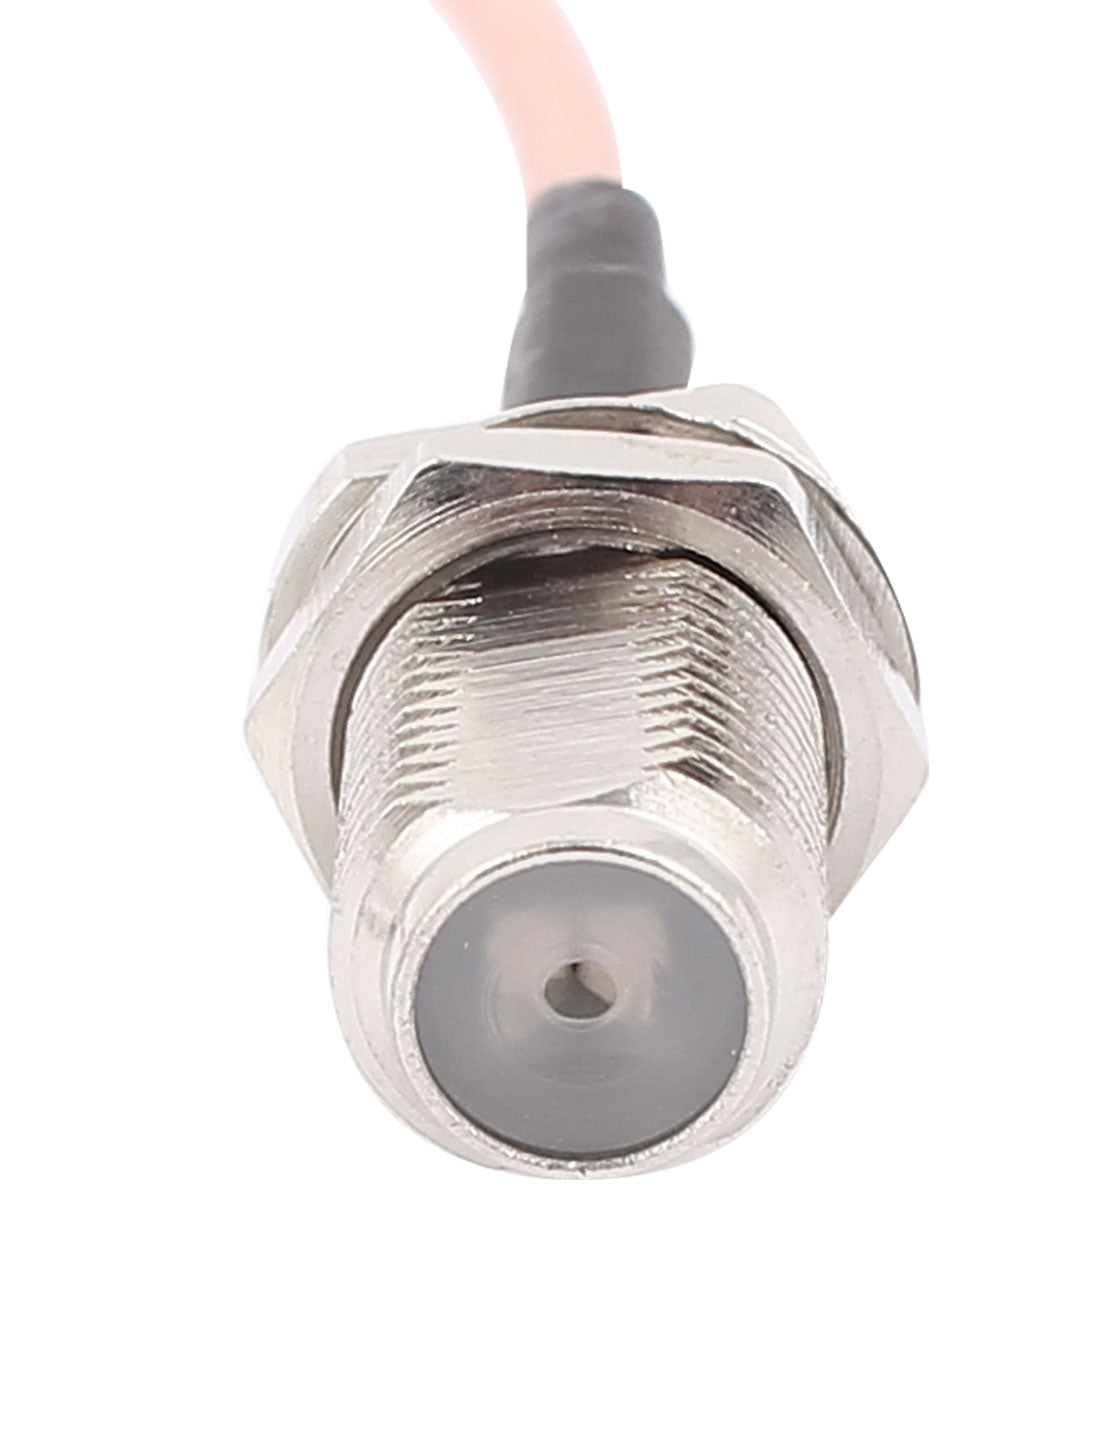 uxcell Uxcell F Female to MCX Male Right Angle Adapter Connector RG316 Coaxial Cable 20cm